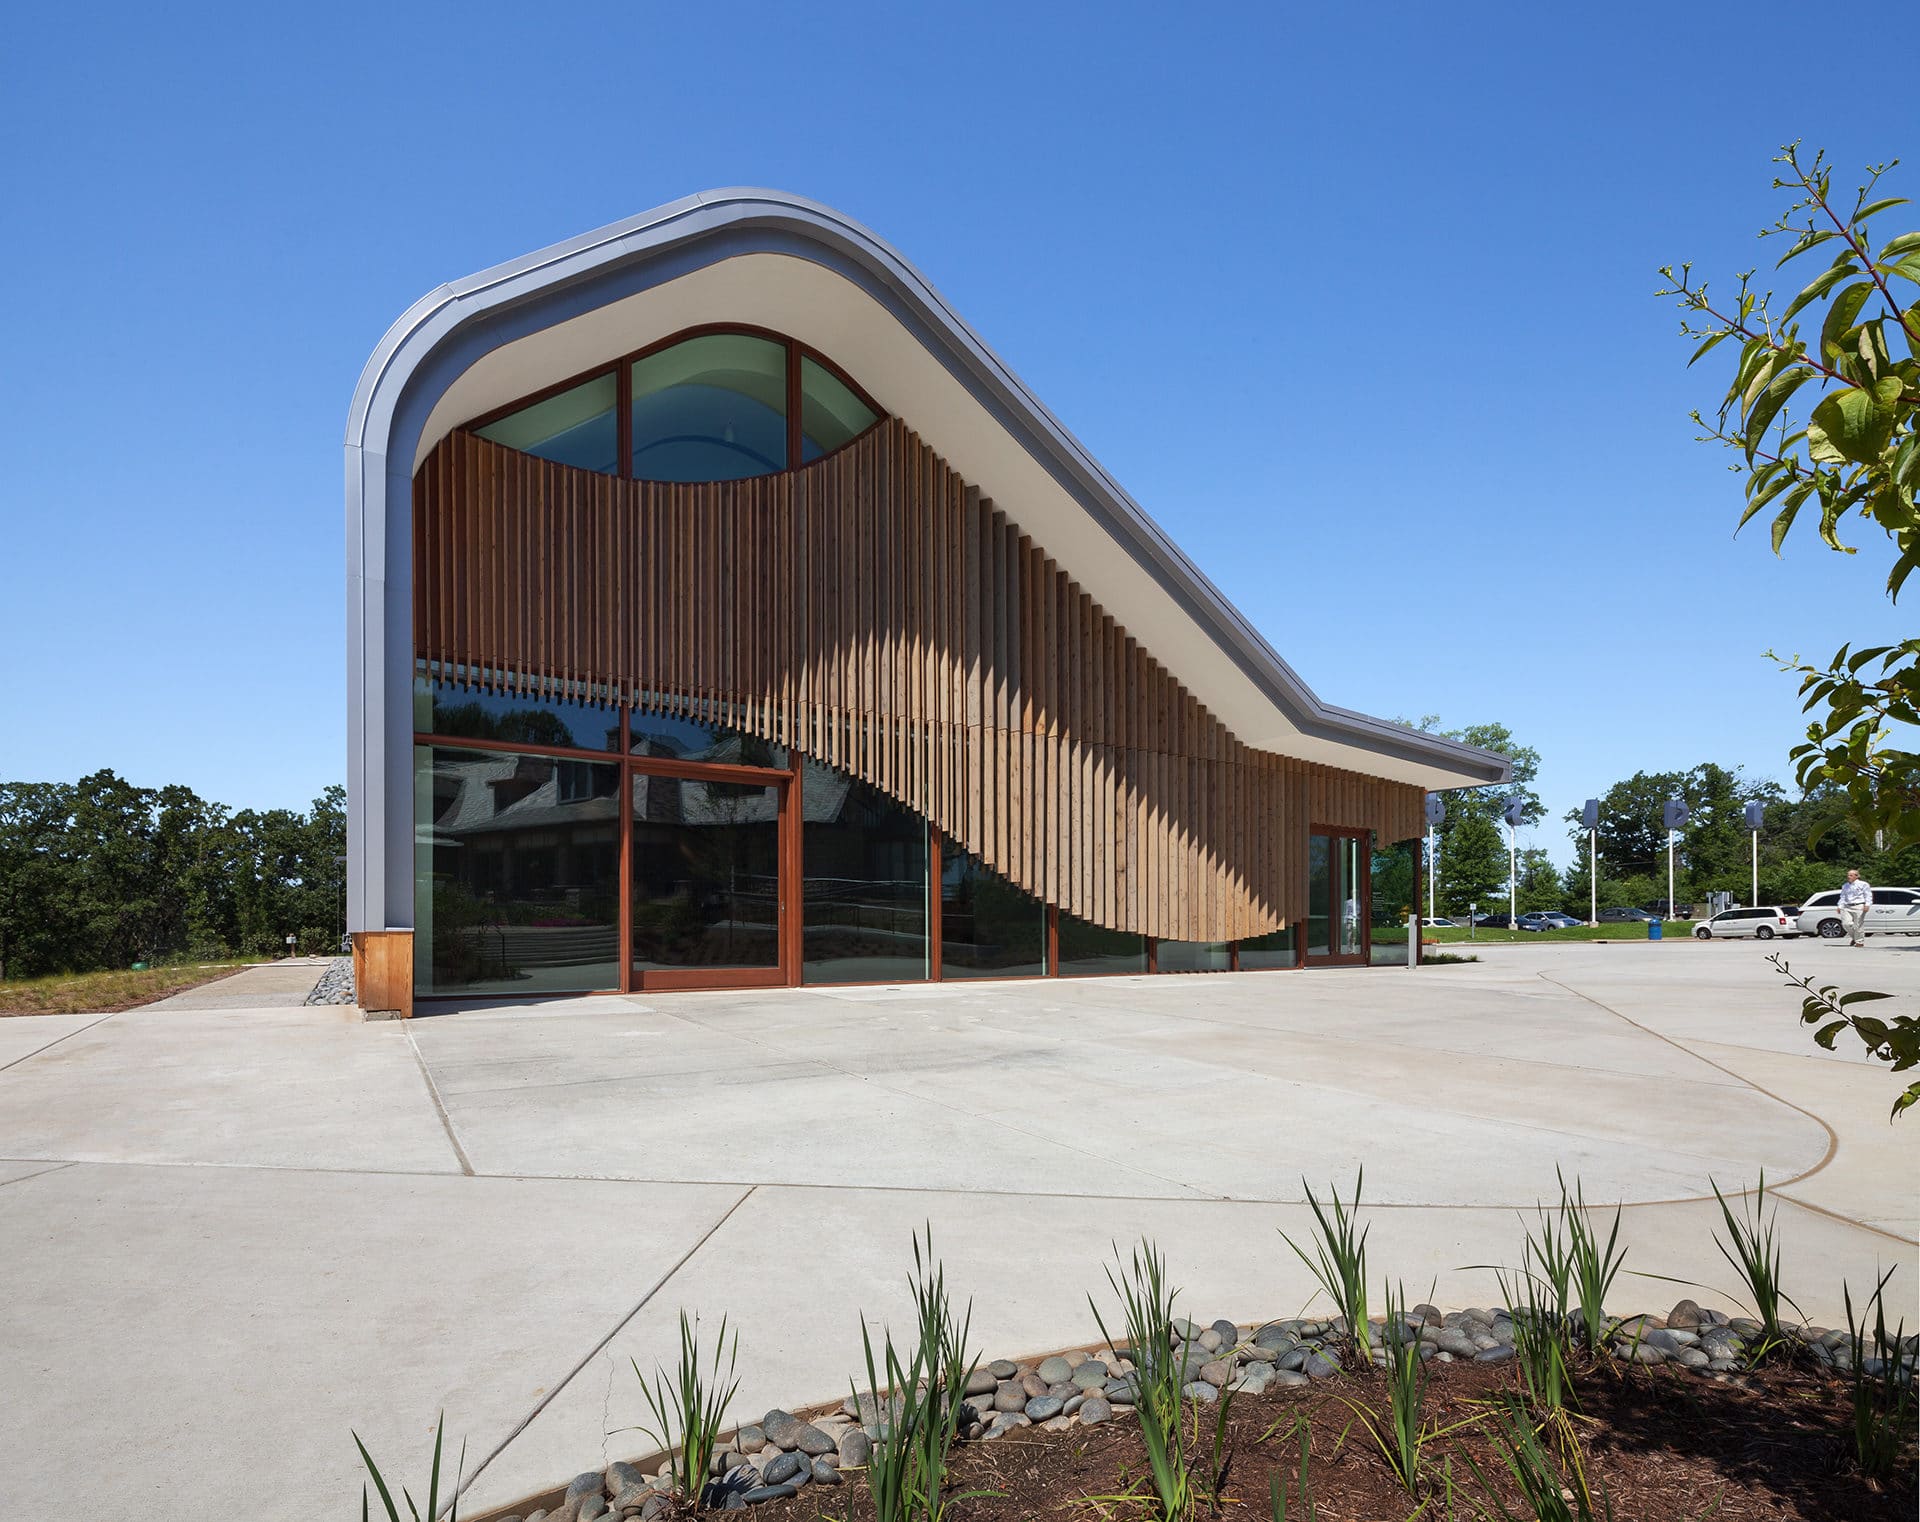 exterior of fine arts center at laumeier designed by trivers architectural firm in st. louis